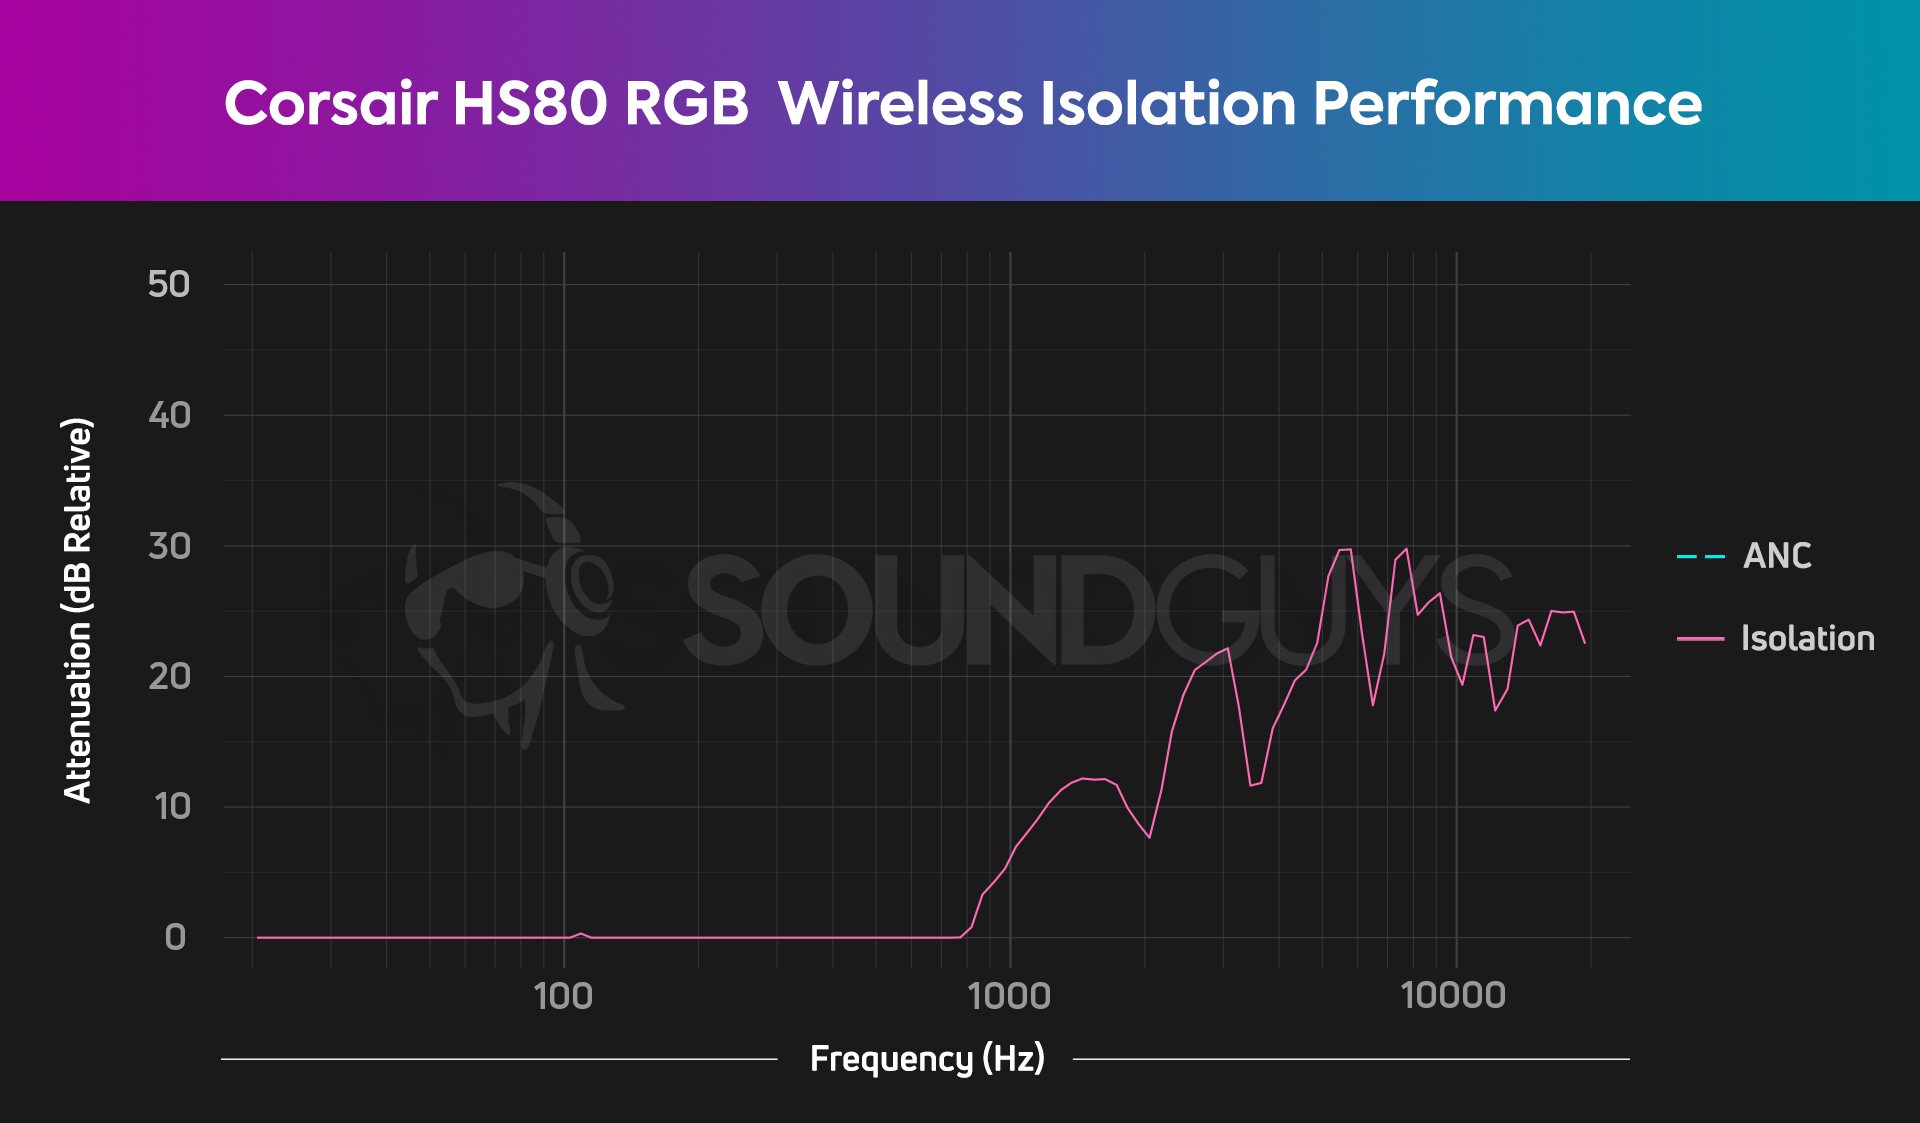 An isolation chart for the Corsair HS80 RGB Wireless gaming headset, which shows negligible isolation performance.